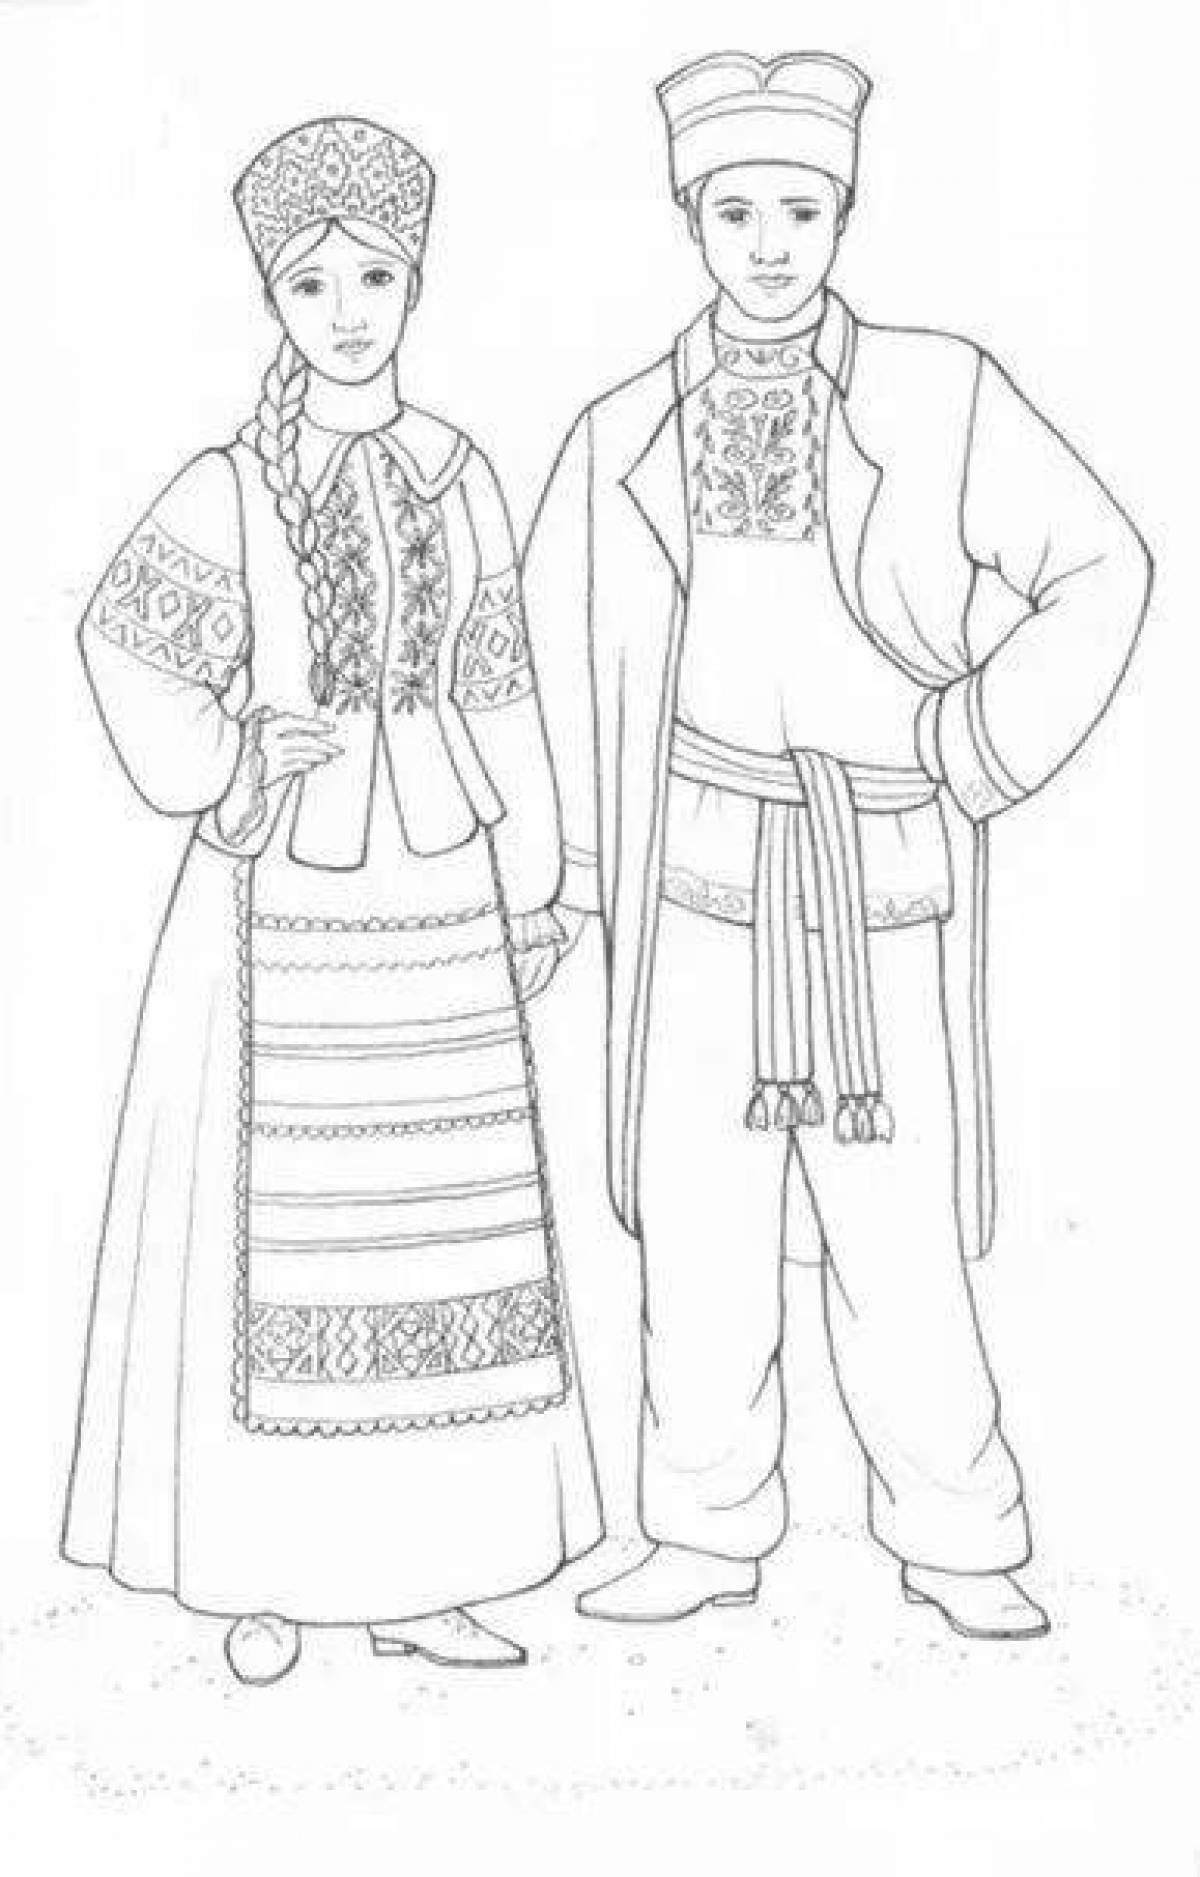 Complex costumes of Russian people